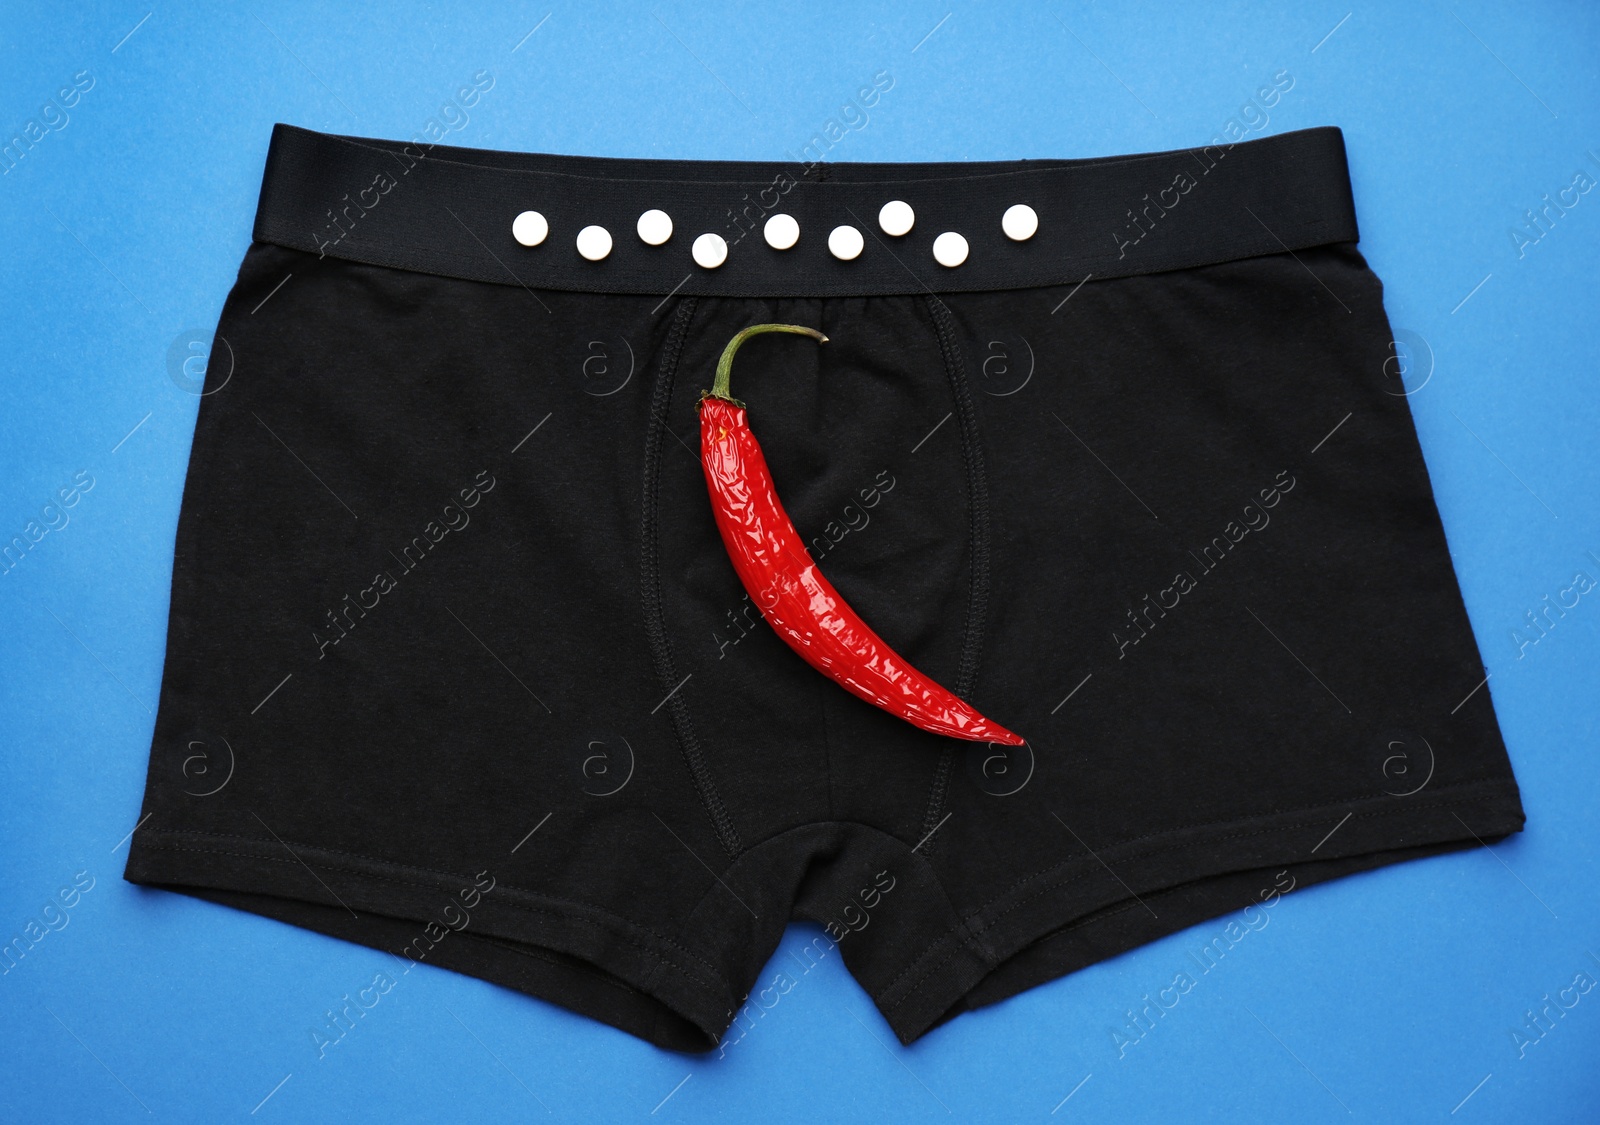 Photo of Men's underwear with chili pepper and pills on blue background, top view. Potency problem concept